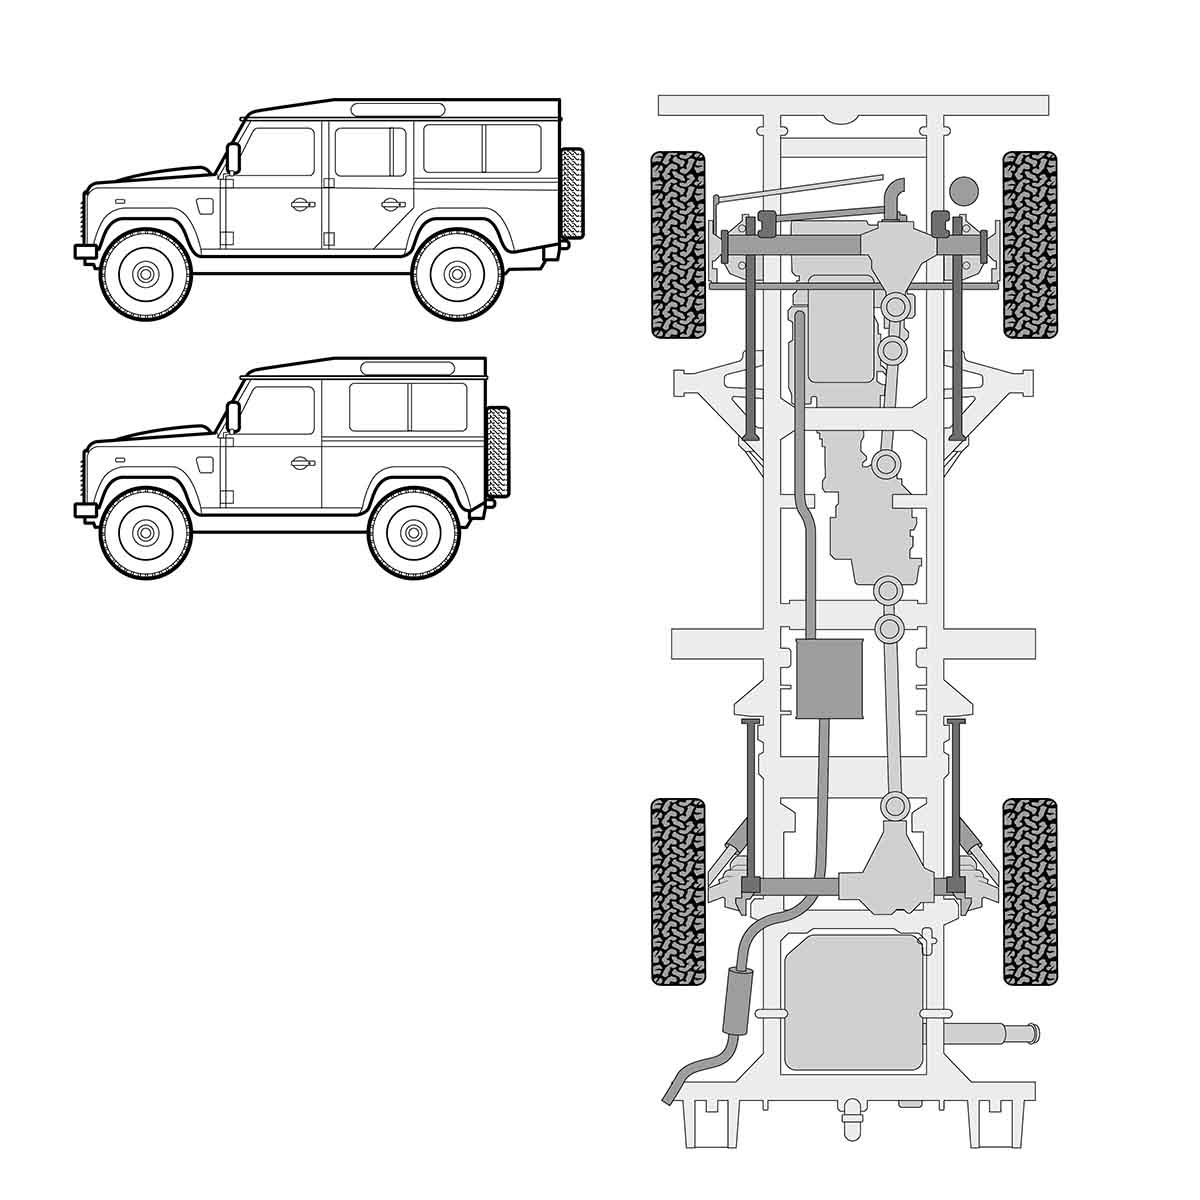 Technical plan graphics illustration of a Land Rover underneath